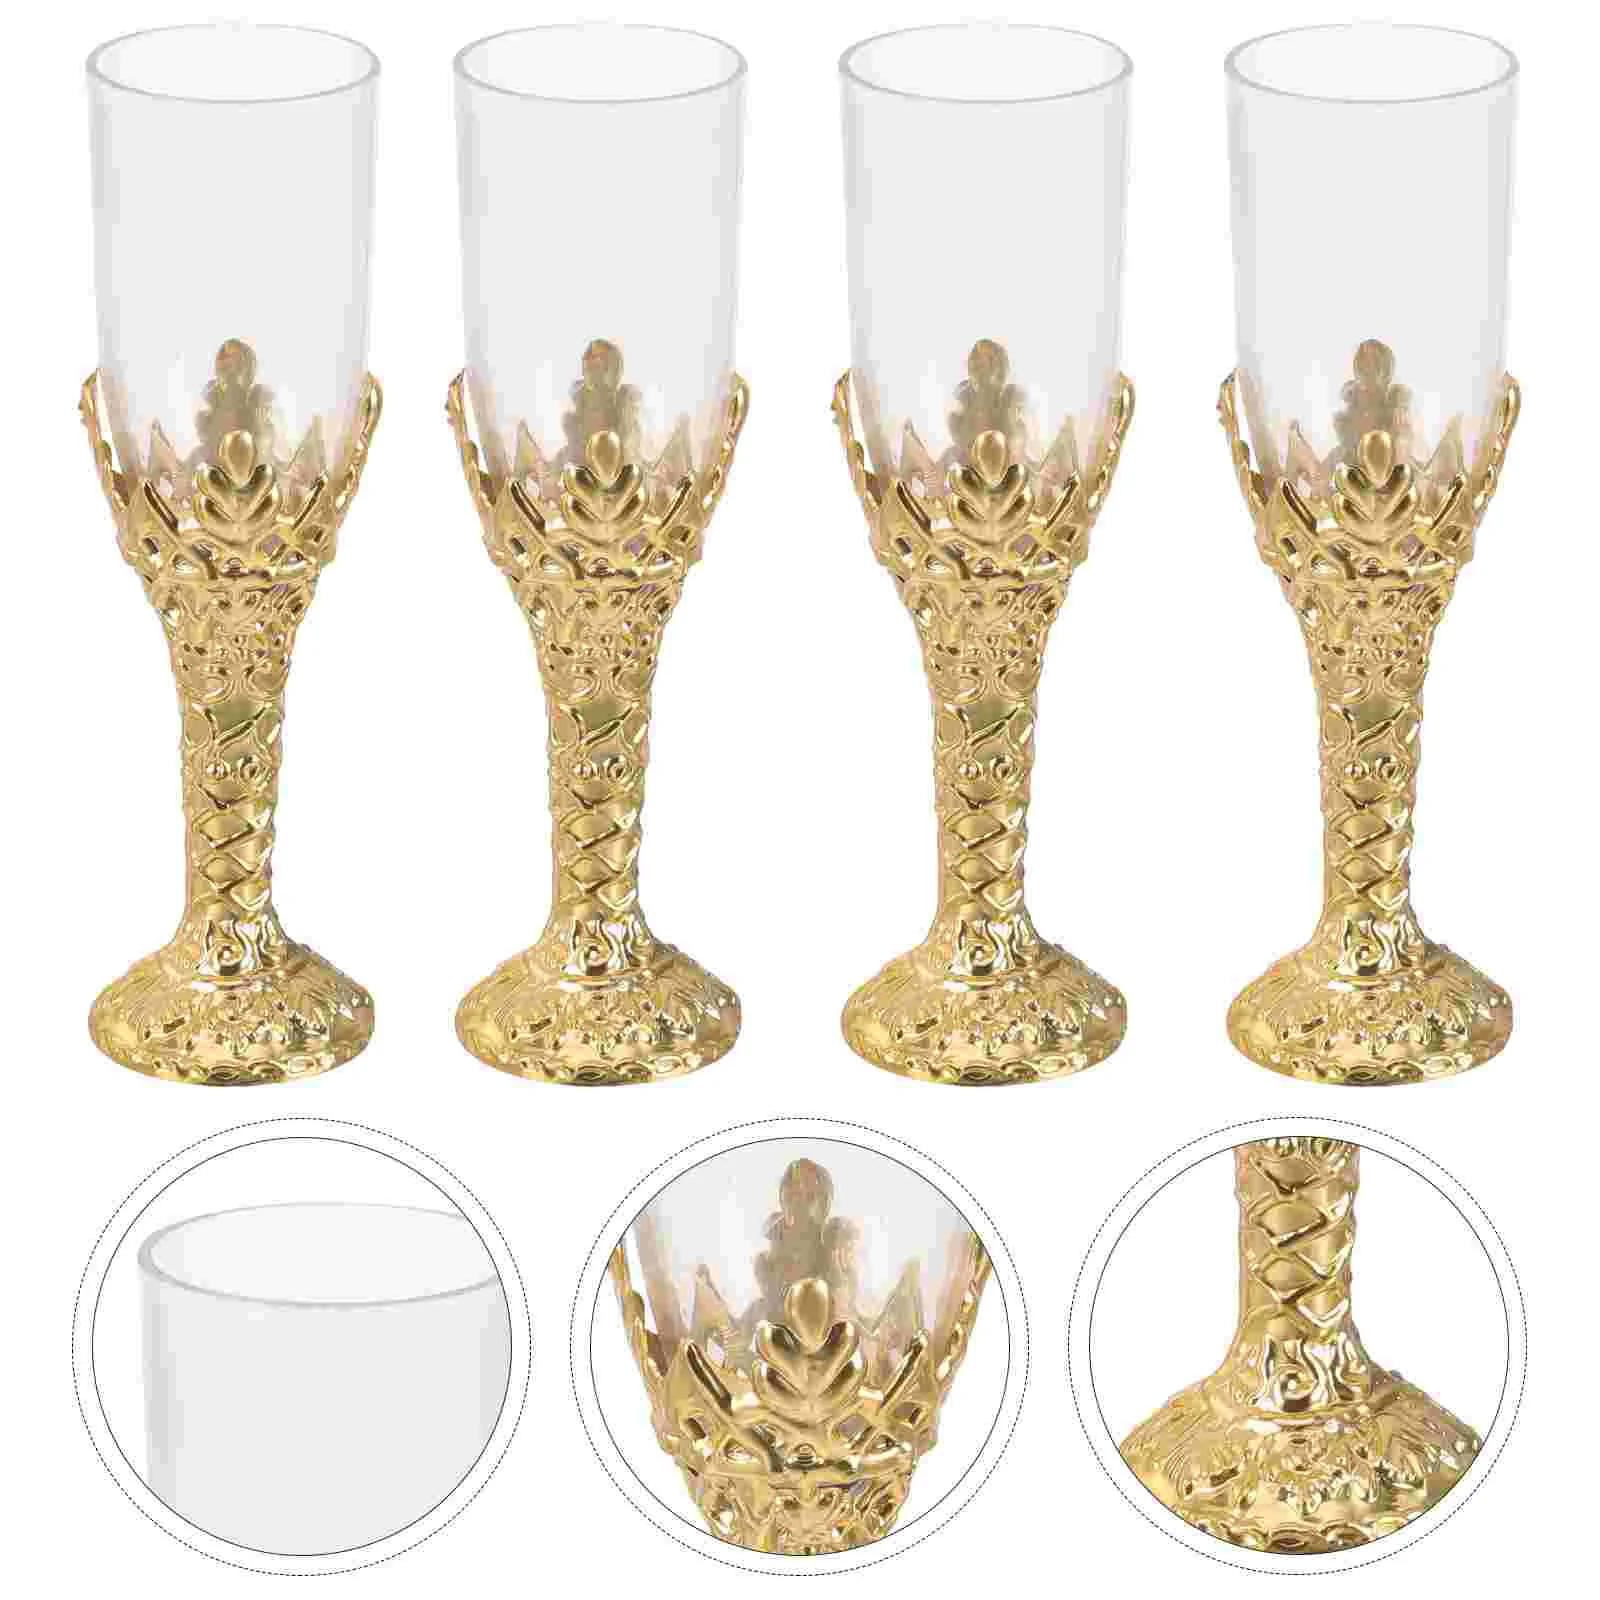 

12 Pcs Dinner Goblet Glasses Disposable Supplies Party Metal Retro Cup Plastic Church Accessory Delicate